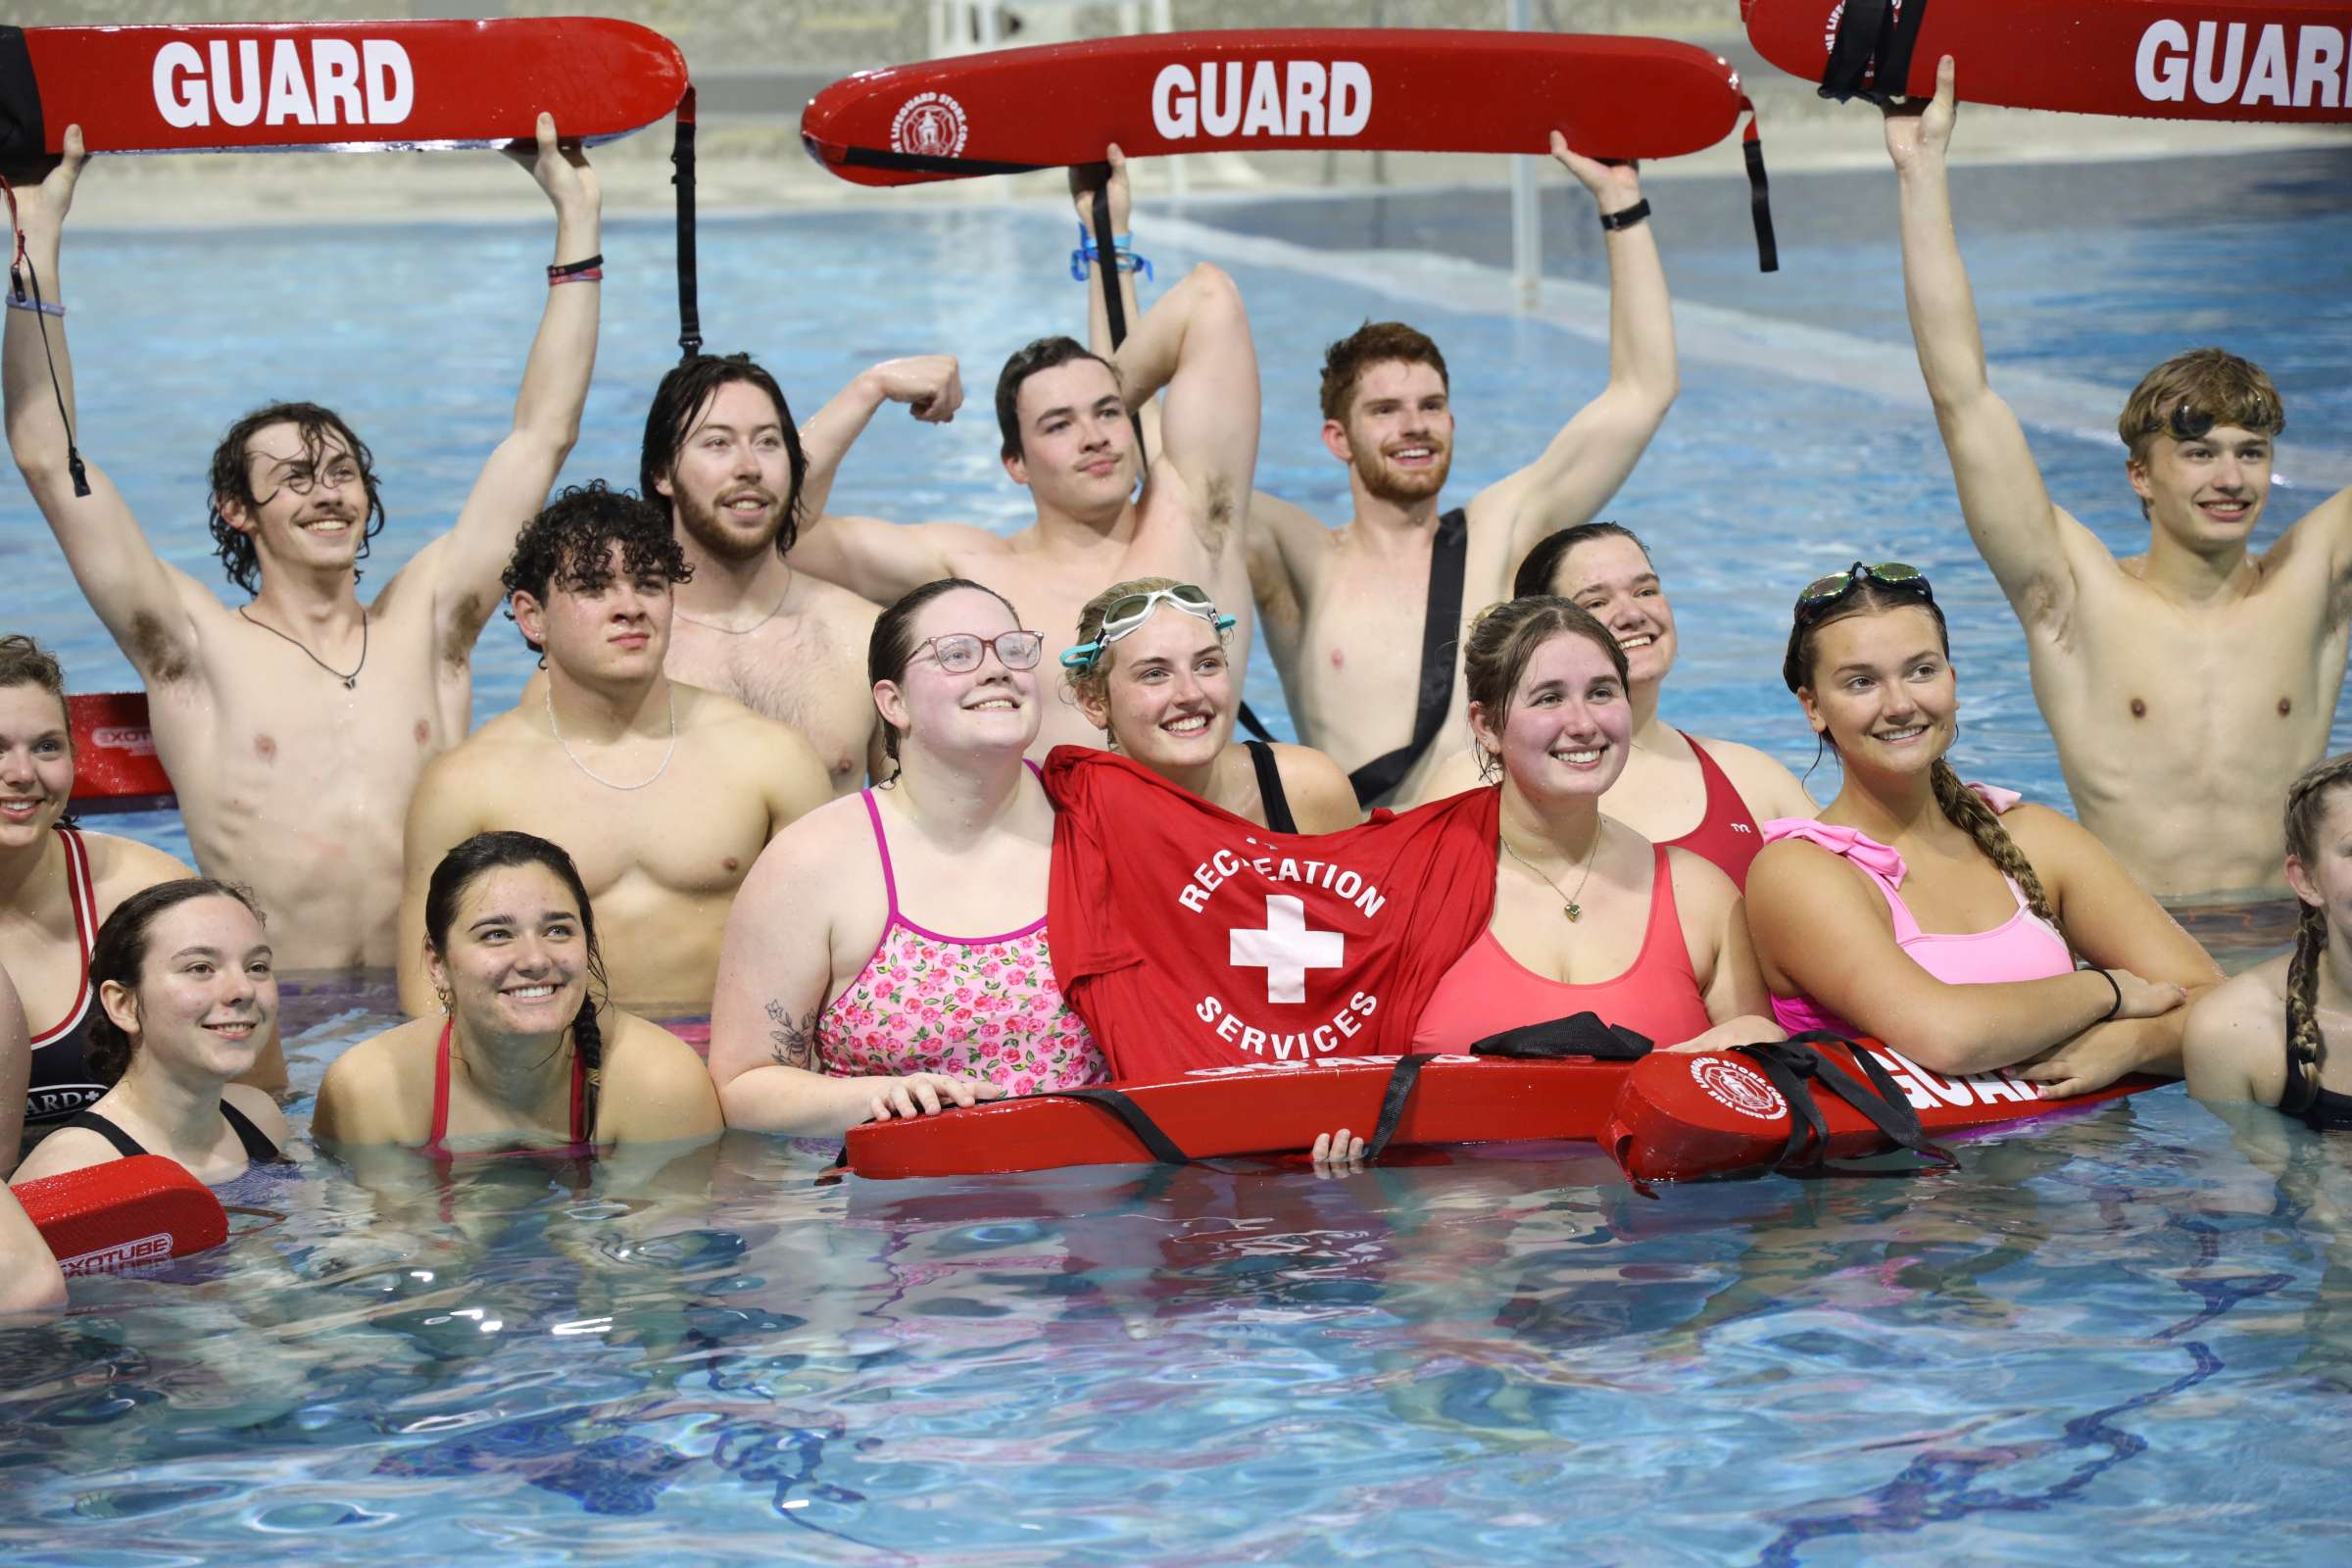 a group photo of the lifeguards at rec services